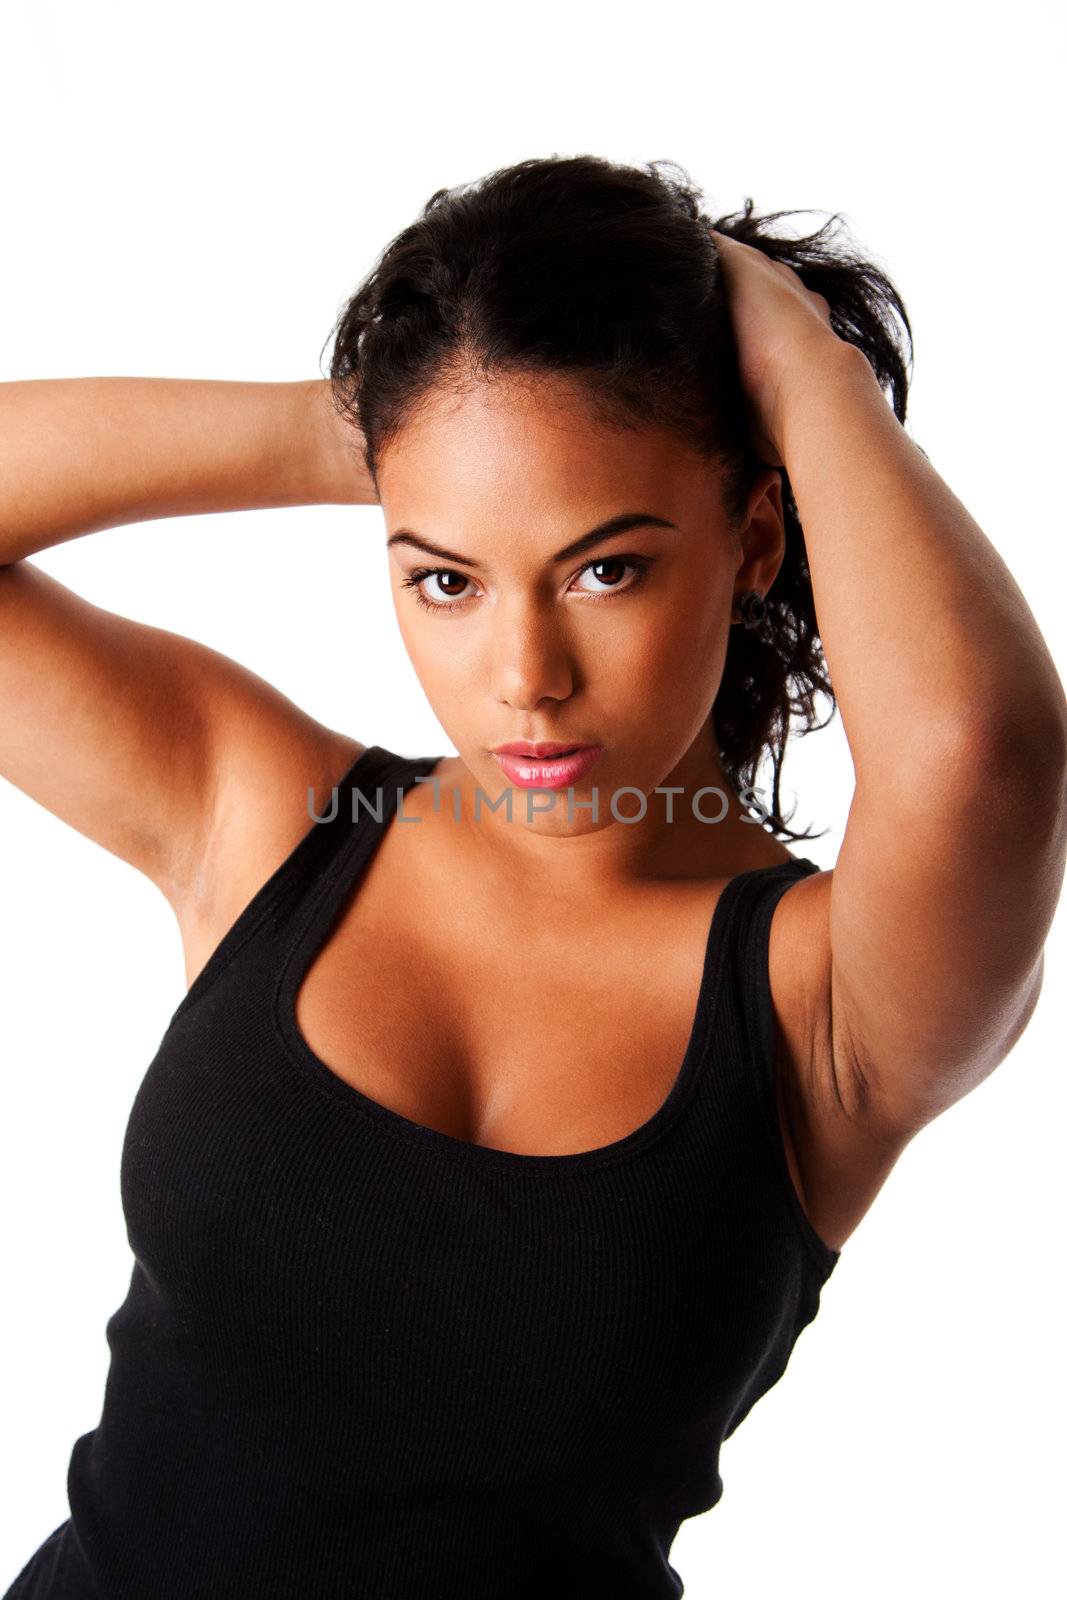 Beautiful Hispanic woman with tanned skin holding pulling up long black hair wearing tank top, isolated.